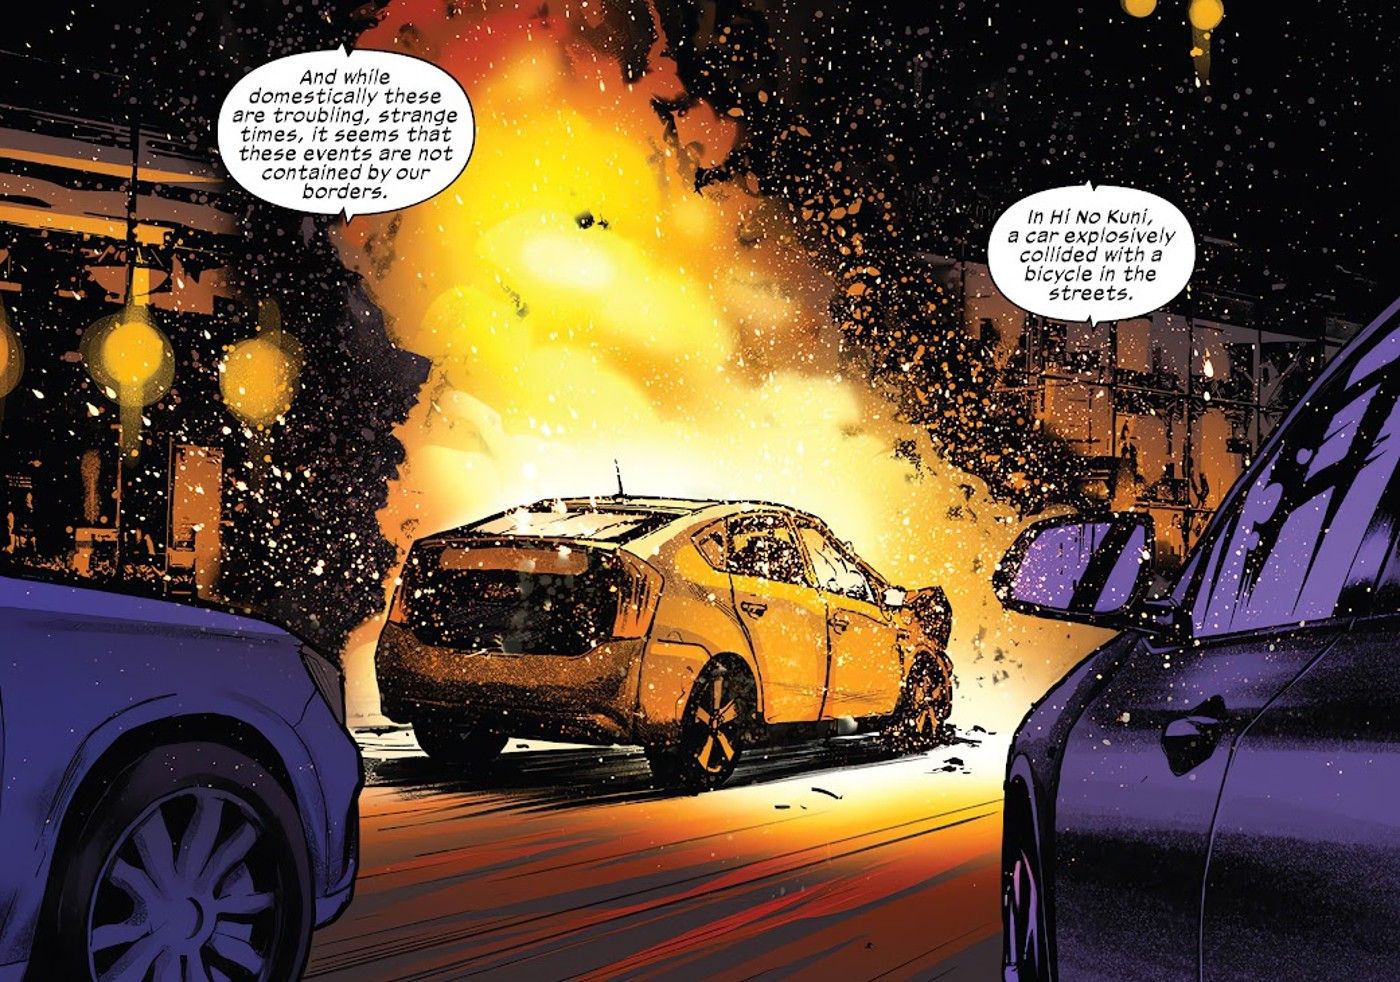 ultimate universe comic page, showing a car exploding after crashing into a mutant